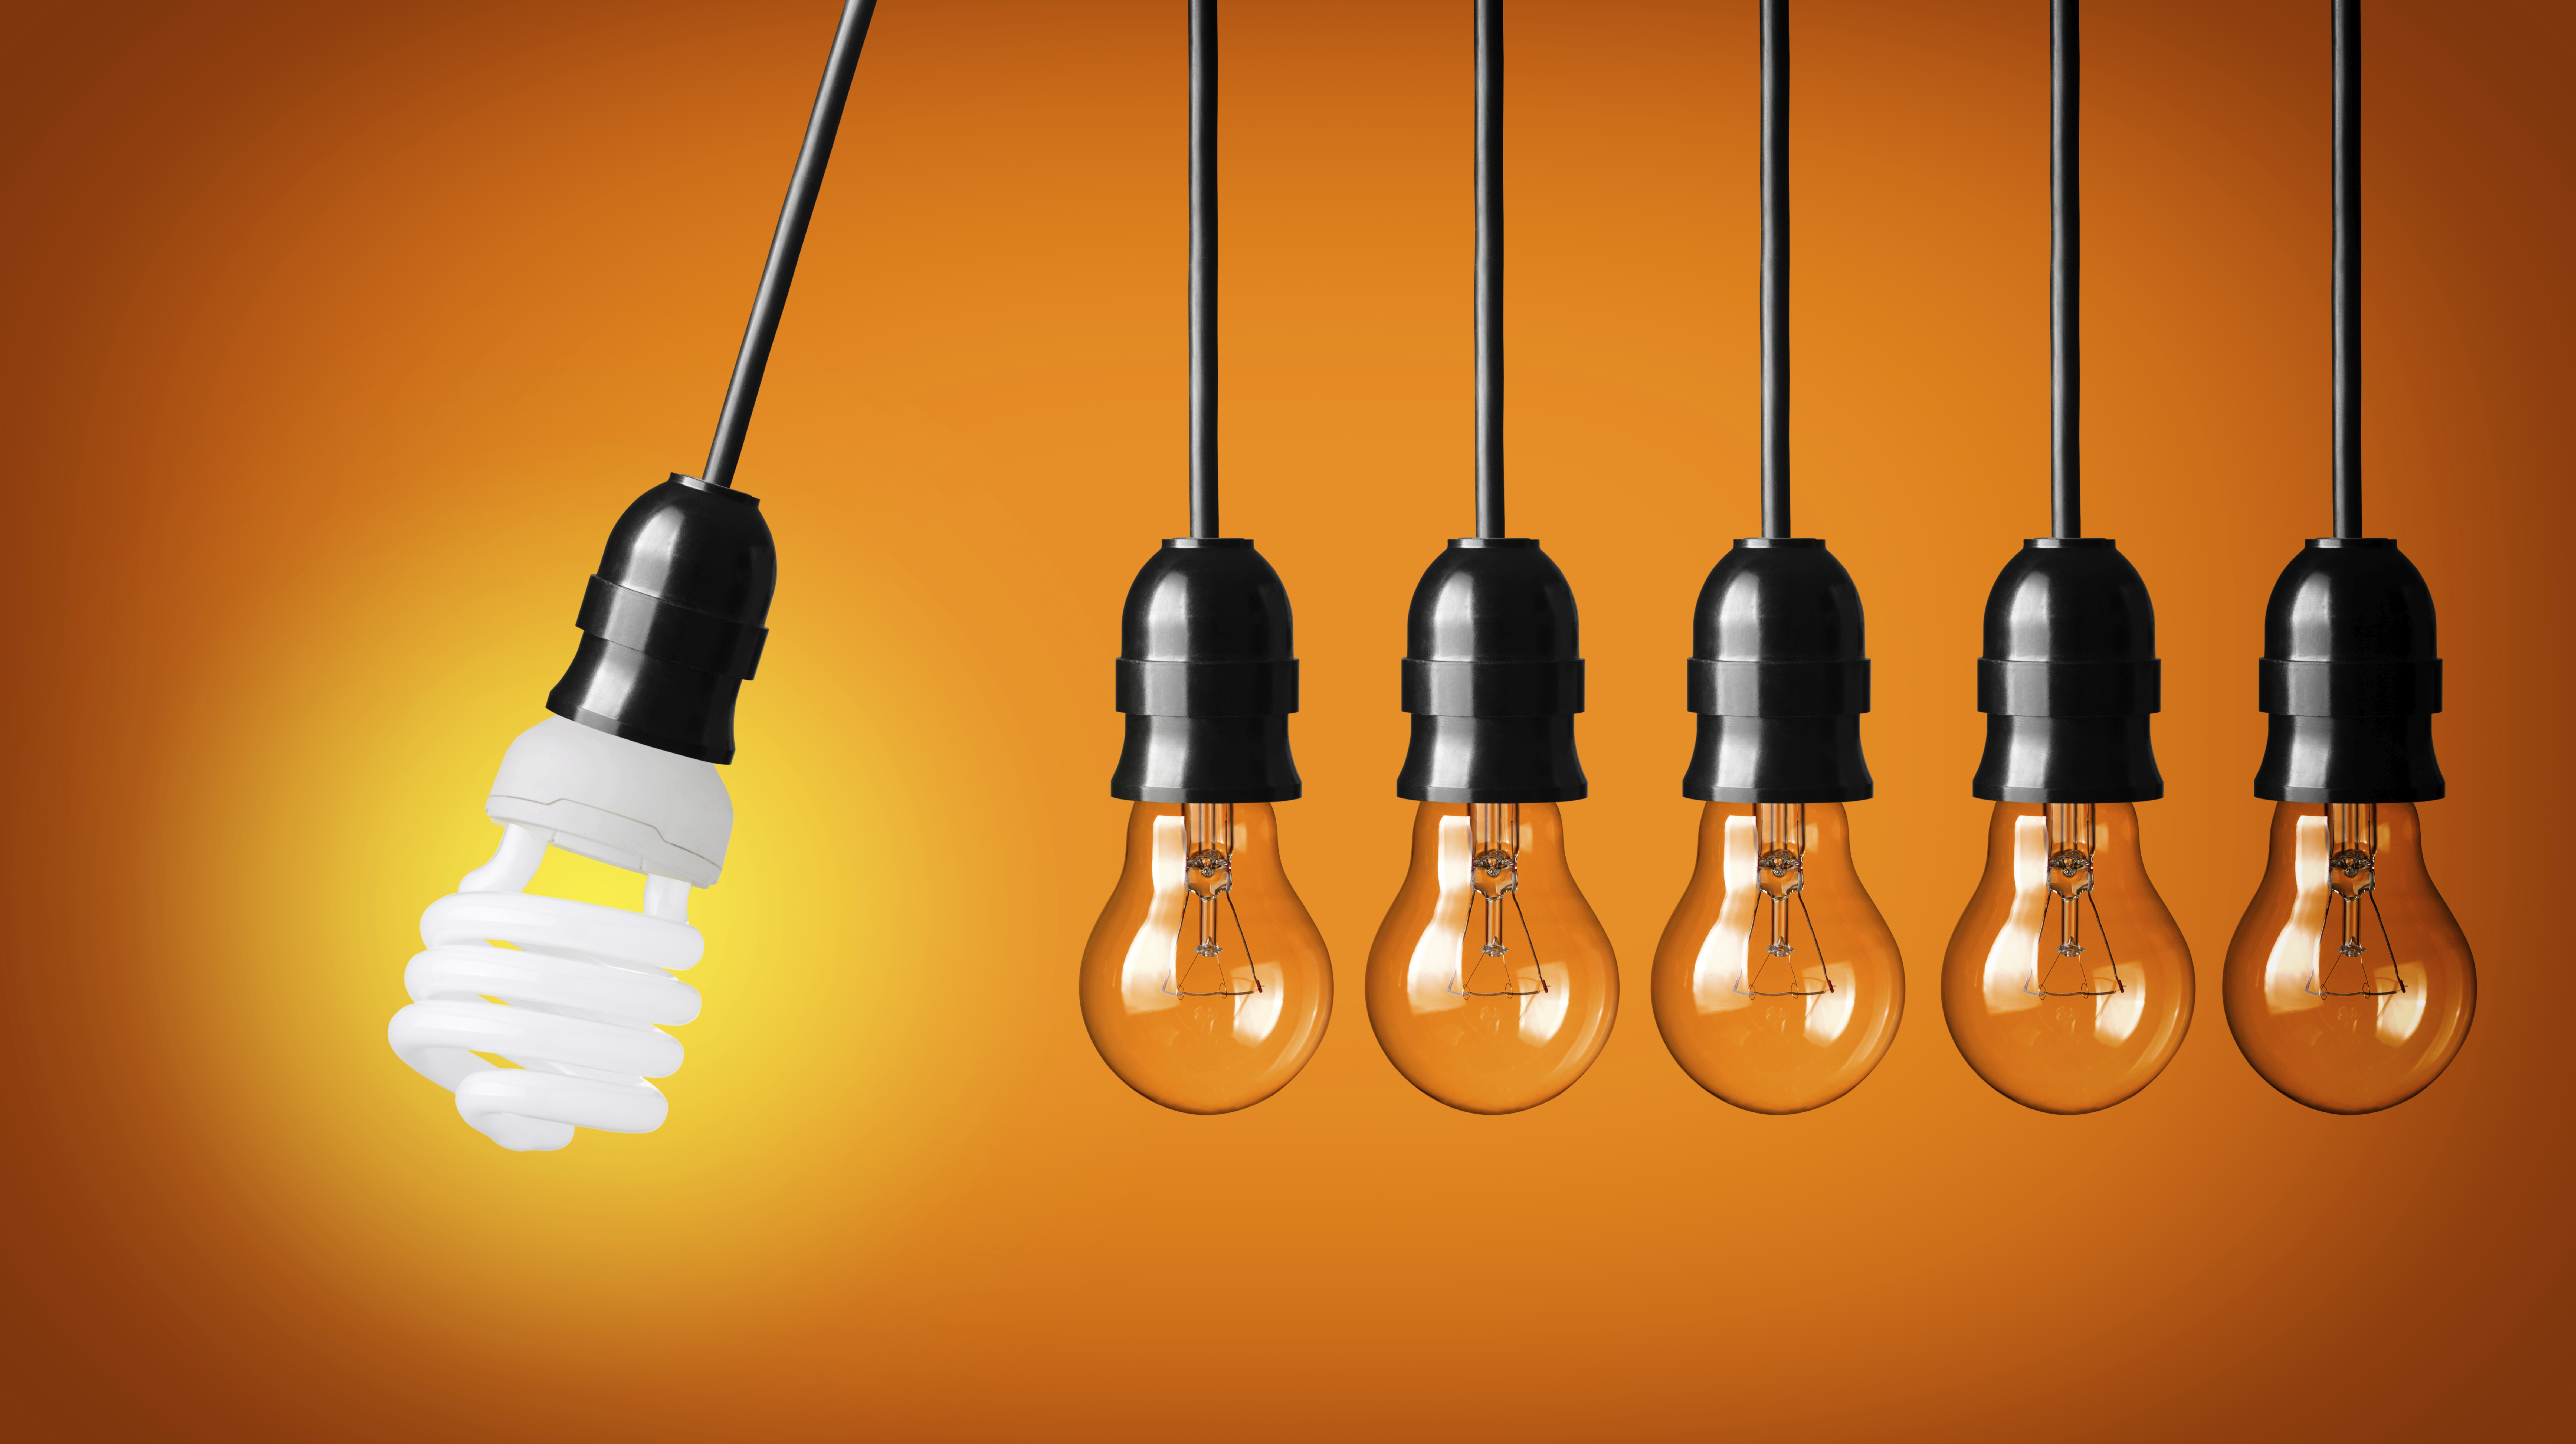 Perpetual motion with light bulbs and energy saver bulb. Idea concept on orange background.